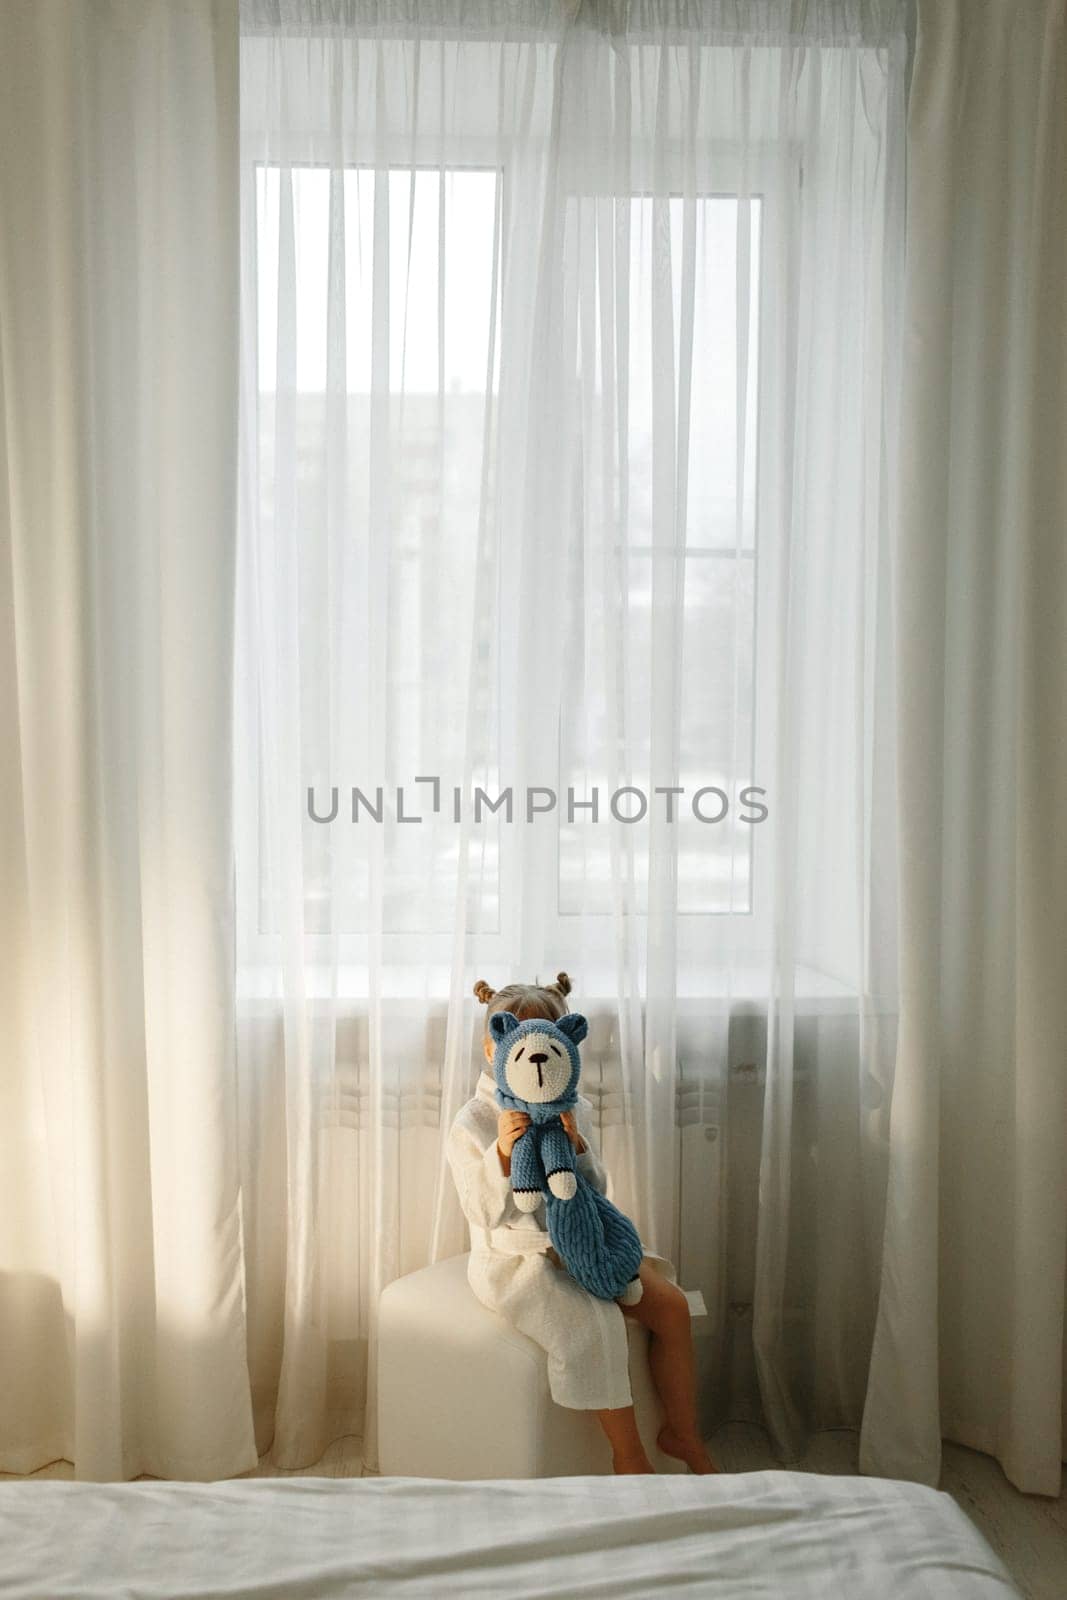 A girl in a dressing gown stands by the window and plays with a knitted toy.